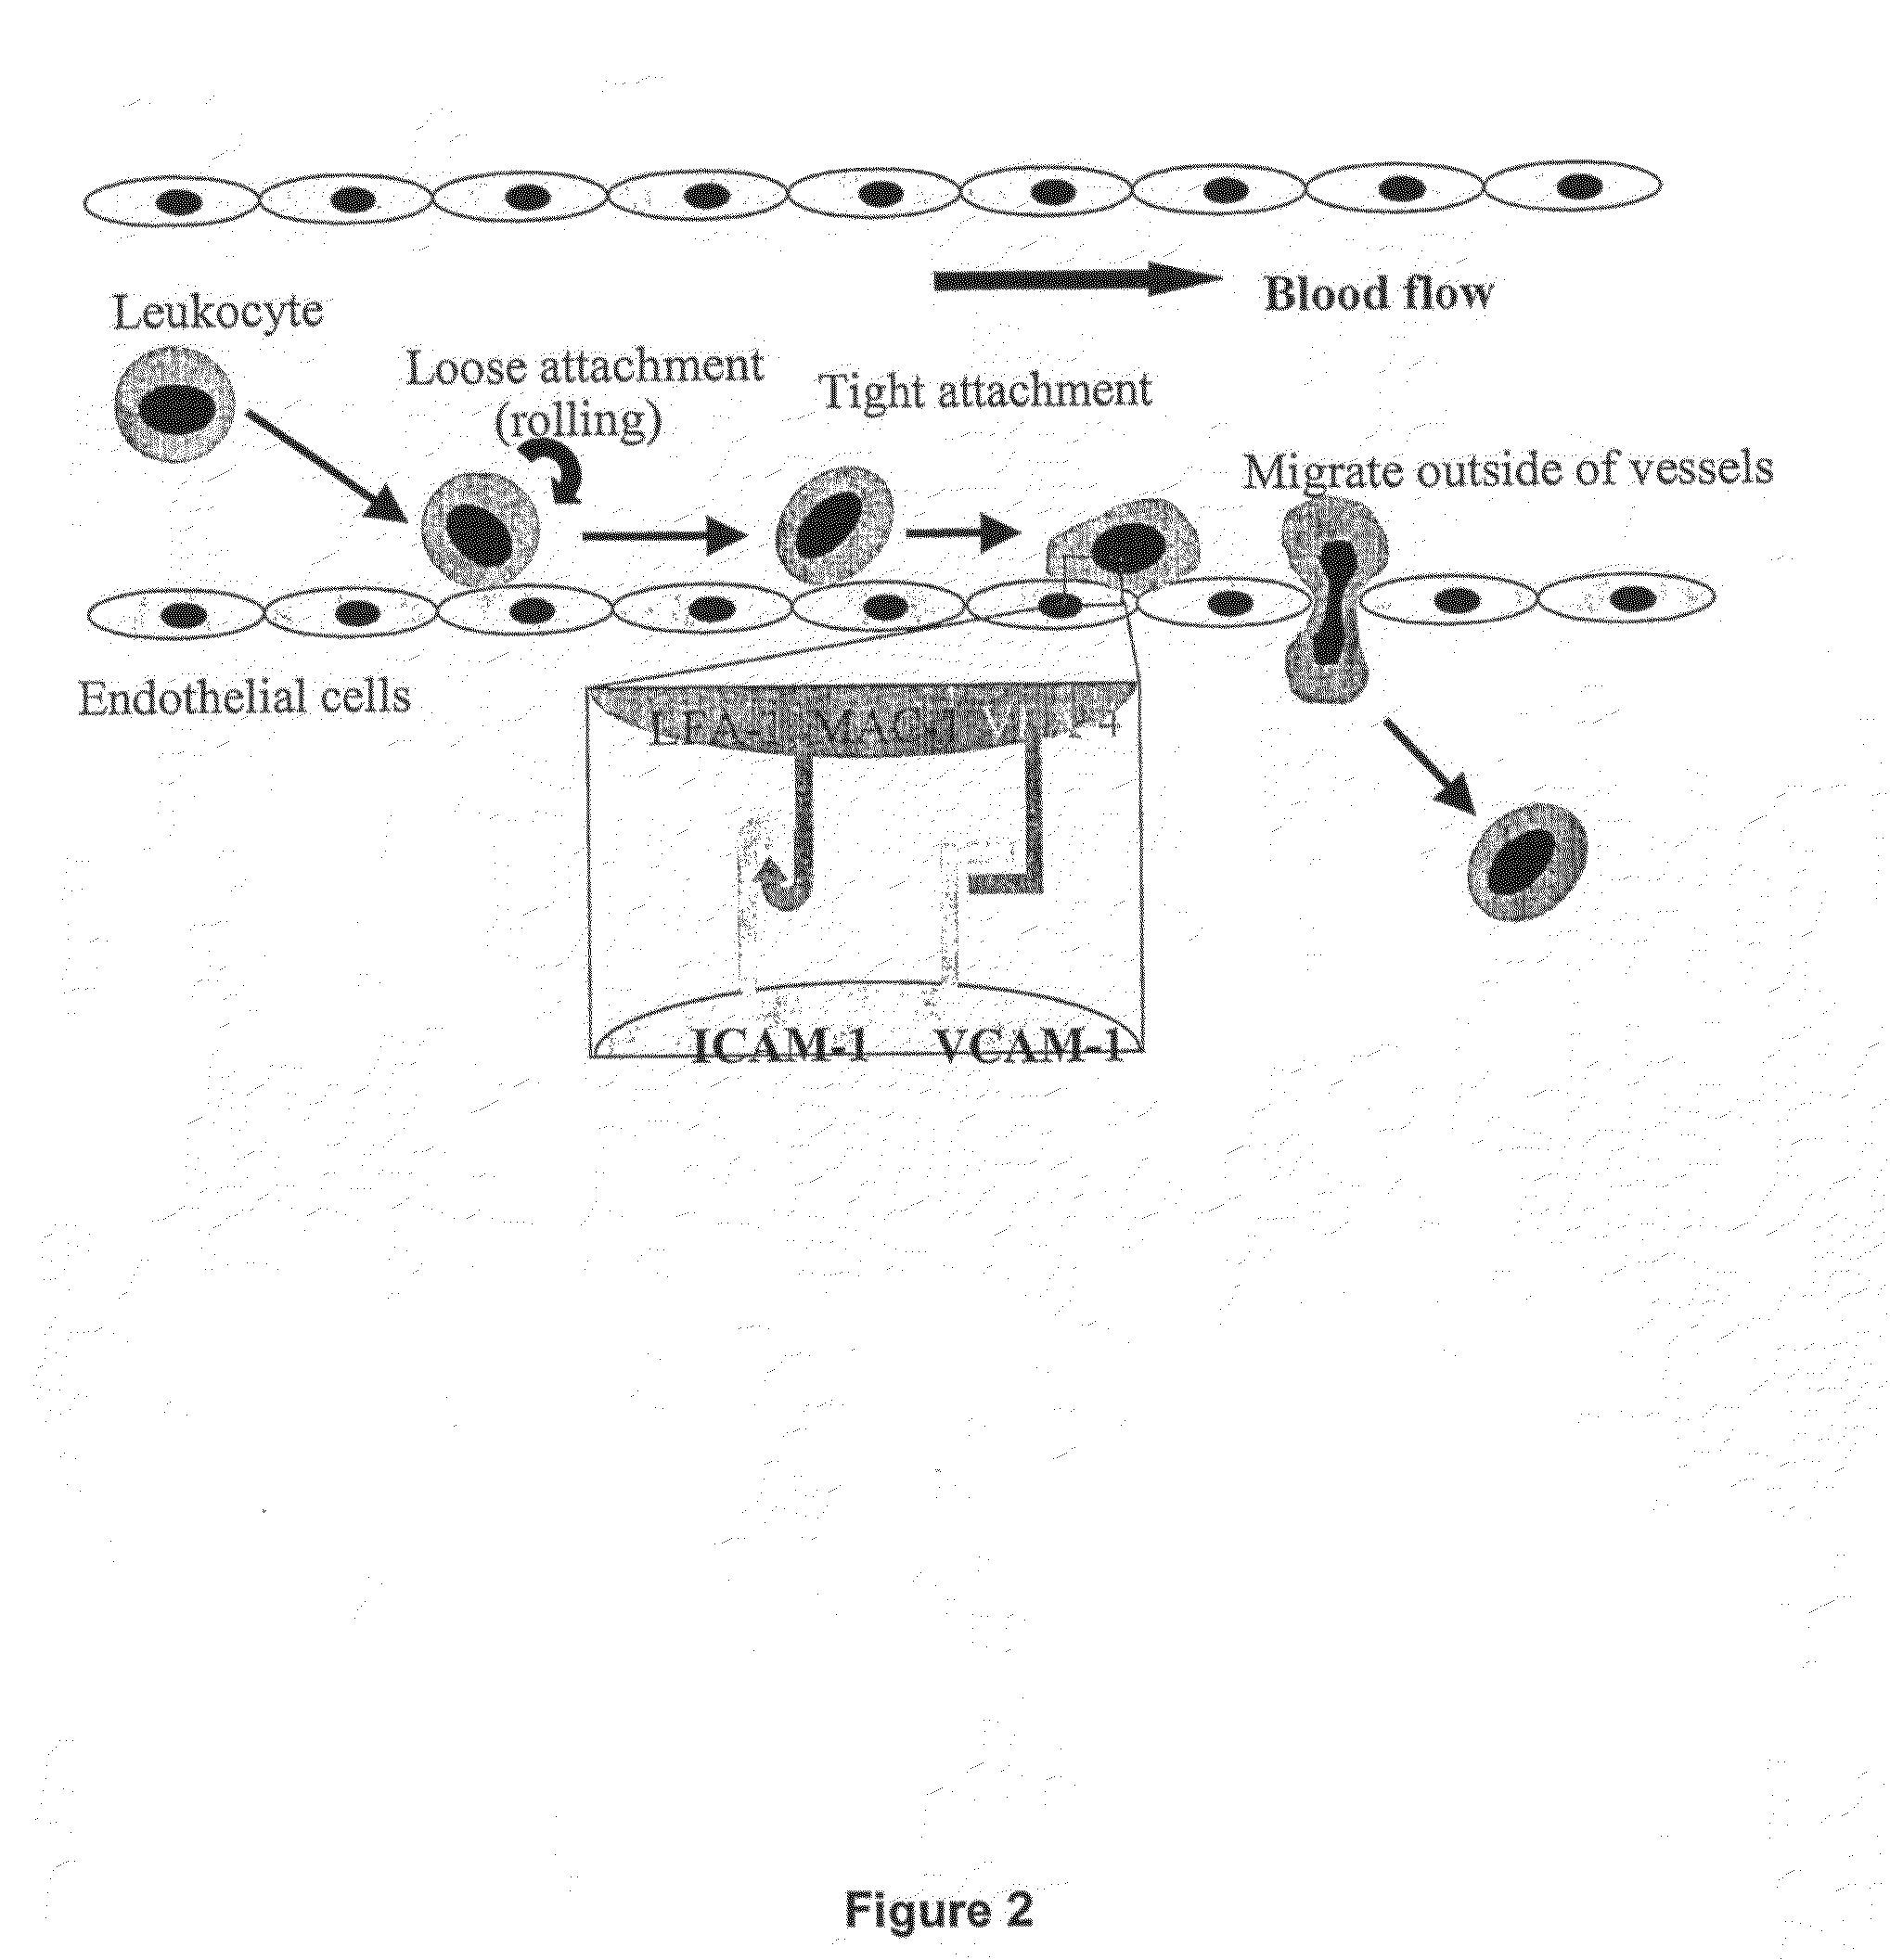 Methods of Diagnosing and Treating an Inflammatory Response